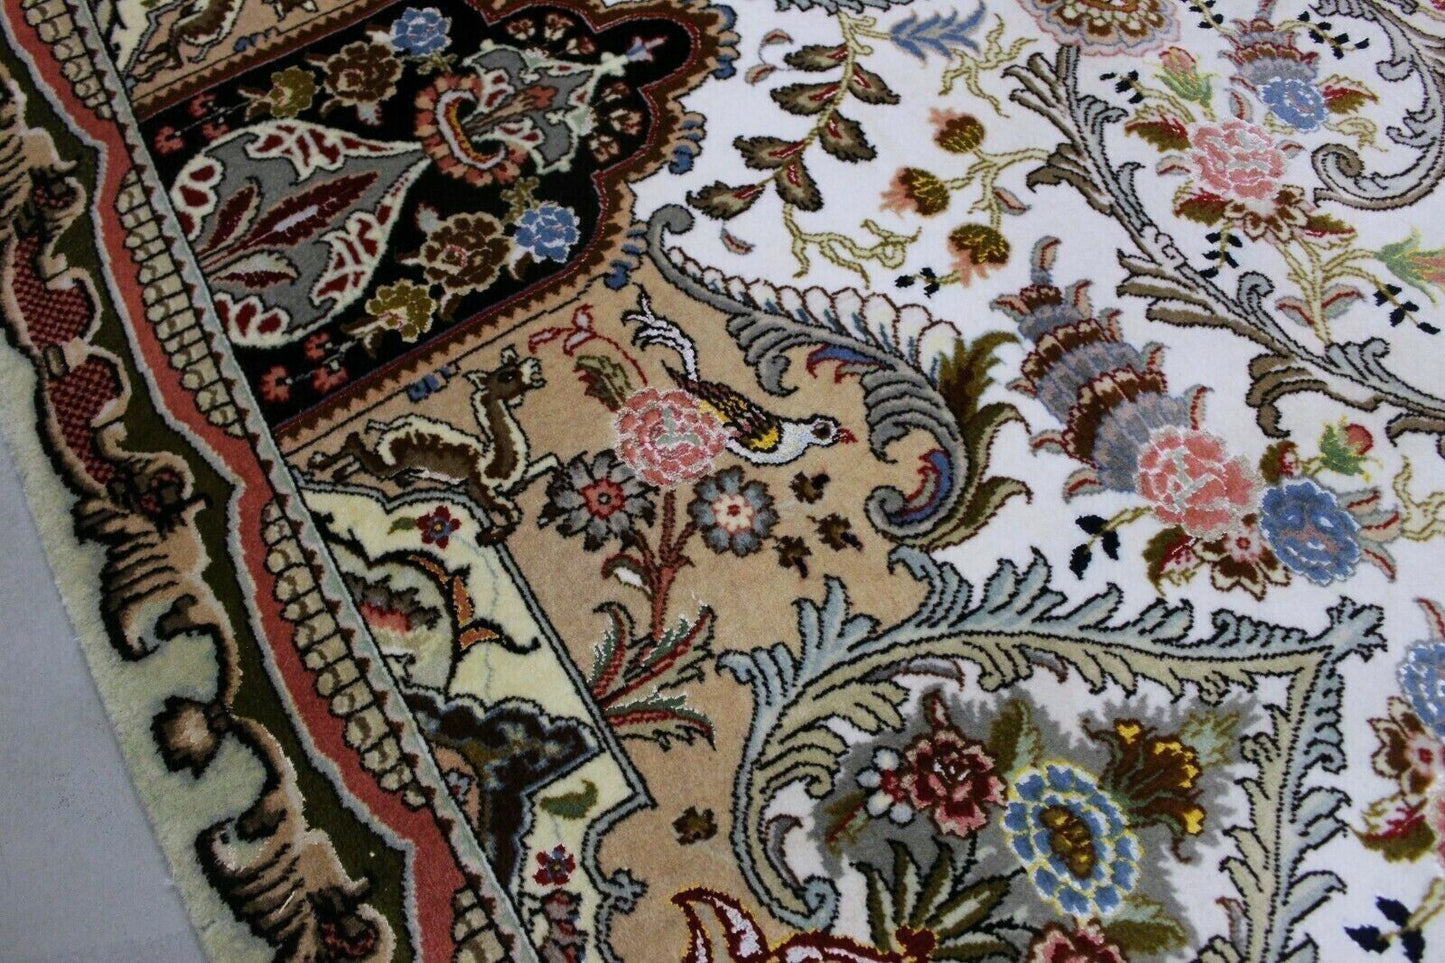 Close-up of wool base on Handmade Vintage Persian Tabriz Rug - Detailed view highlighting the high-quality woven wool base for durability and comfort.